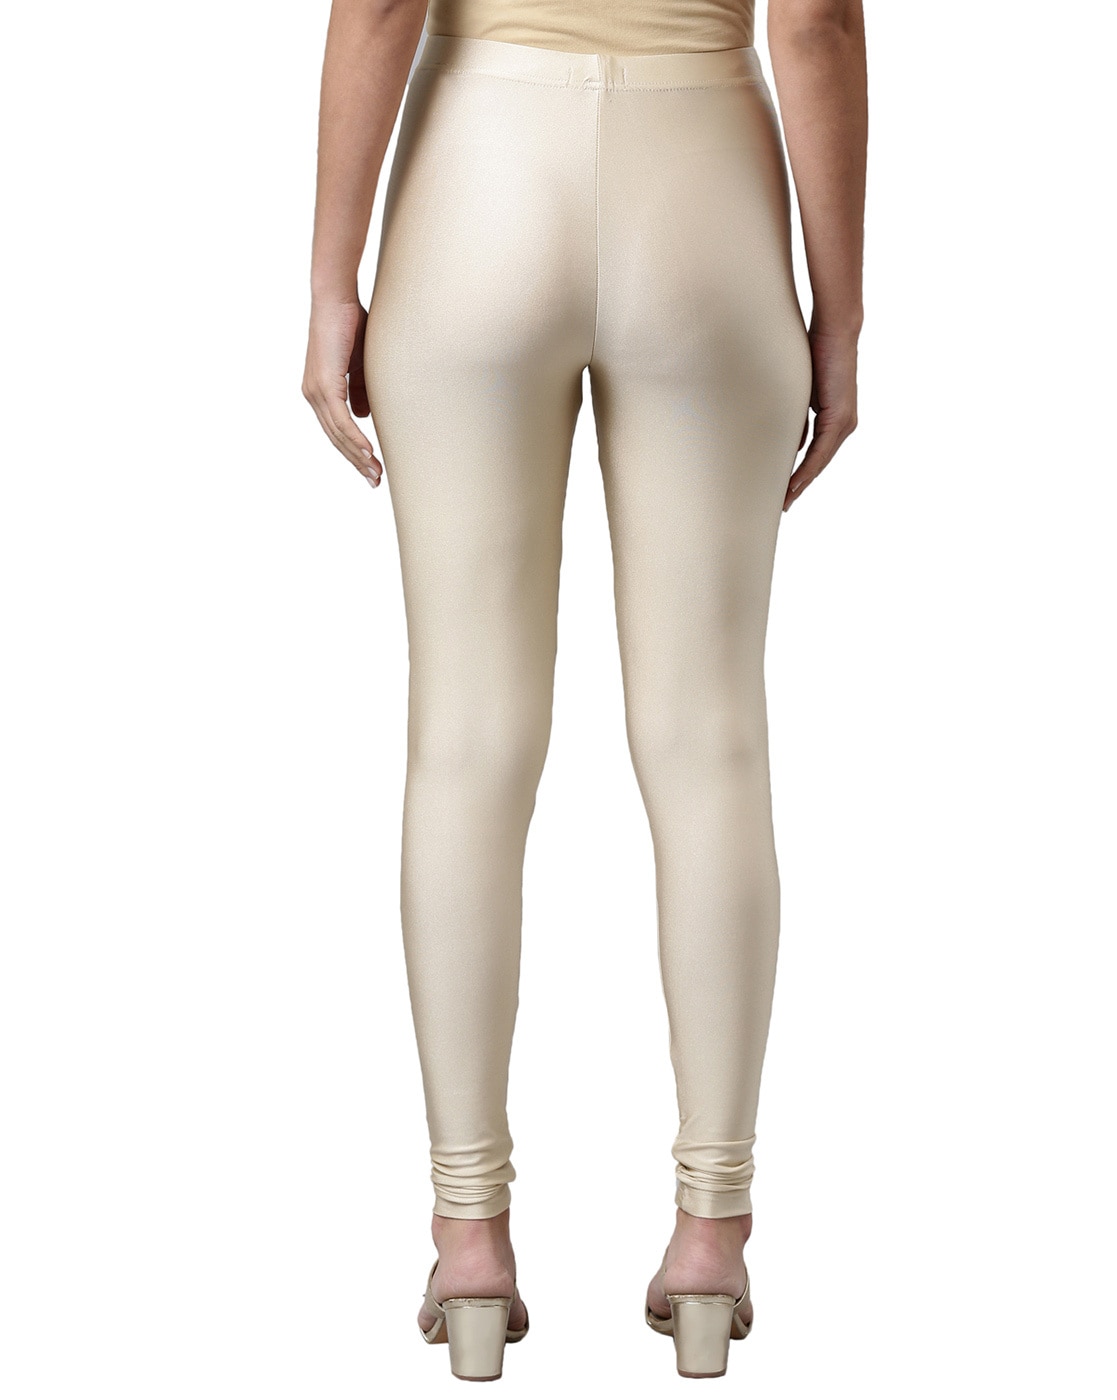  Women's Leggings - Ivory / Women's Leggings / Women's Clothing:  Clothing, Shoes & Jewelry